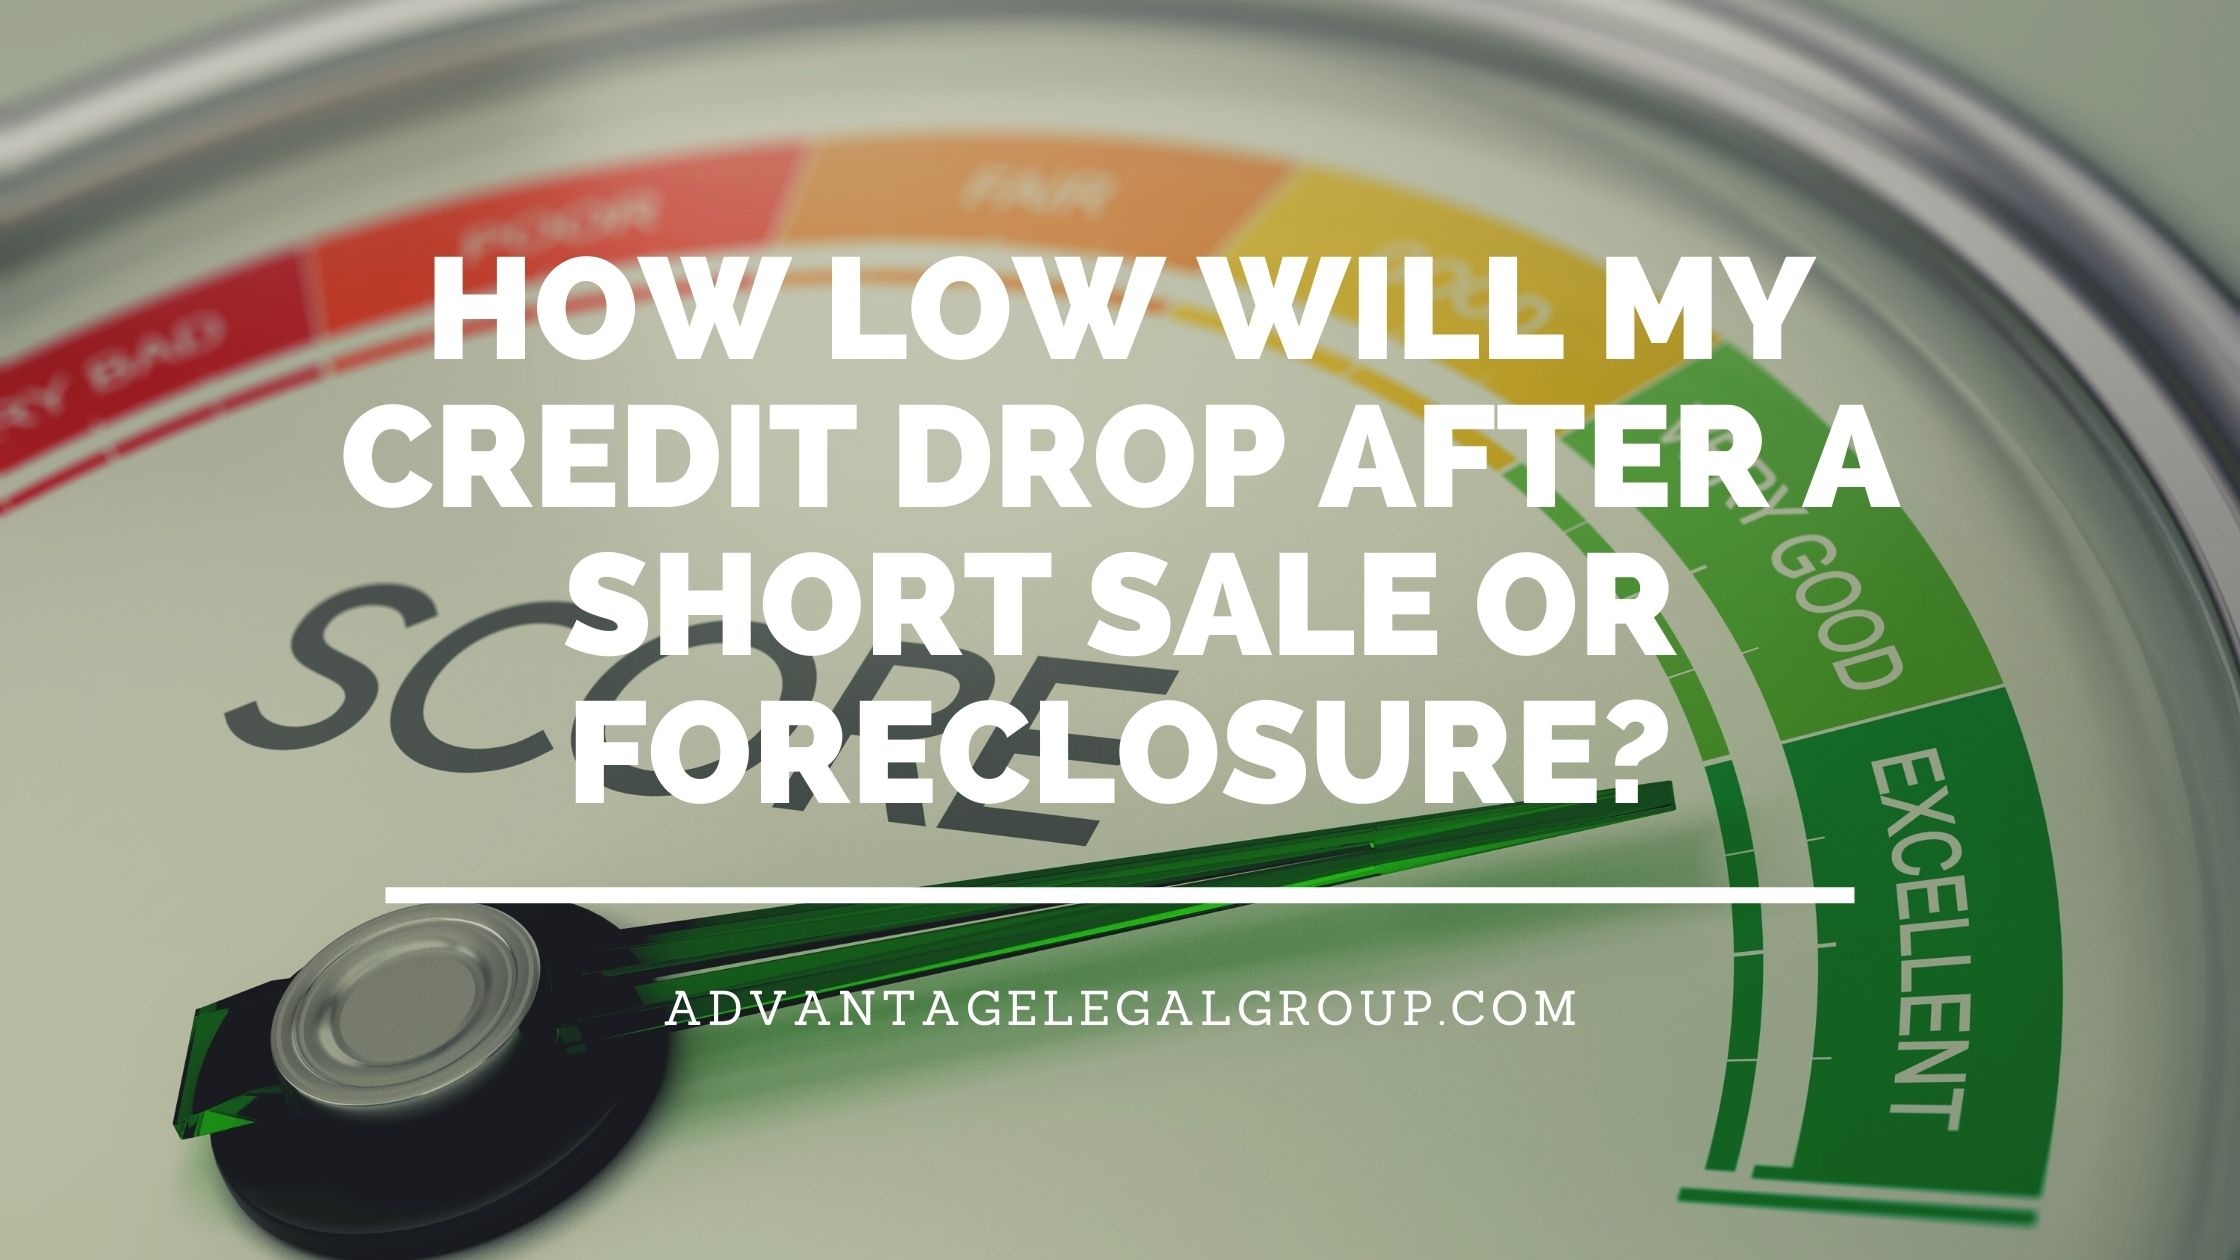 How Low Will My Credit Drop After a Short Sale or Foreclosure?